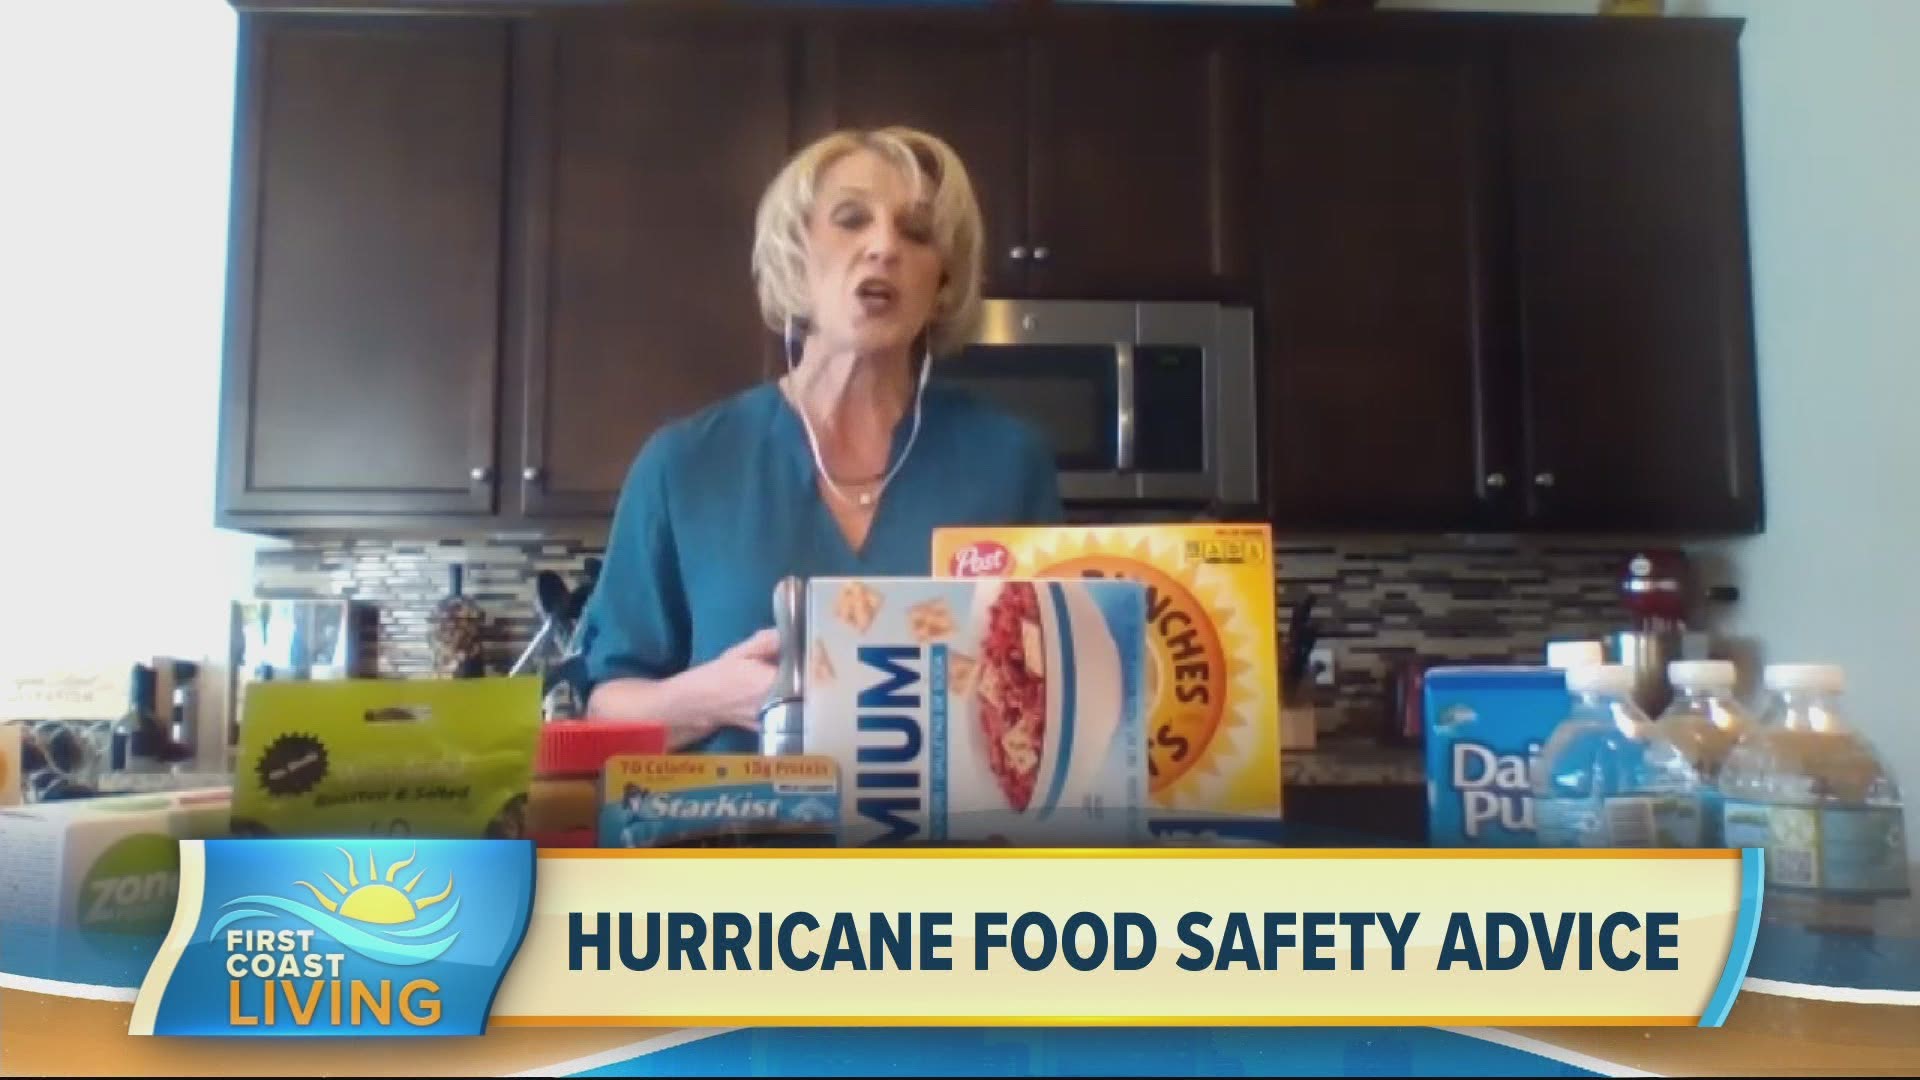 Keep these tips in mind this hurricane season.